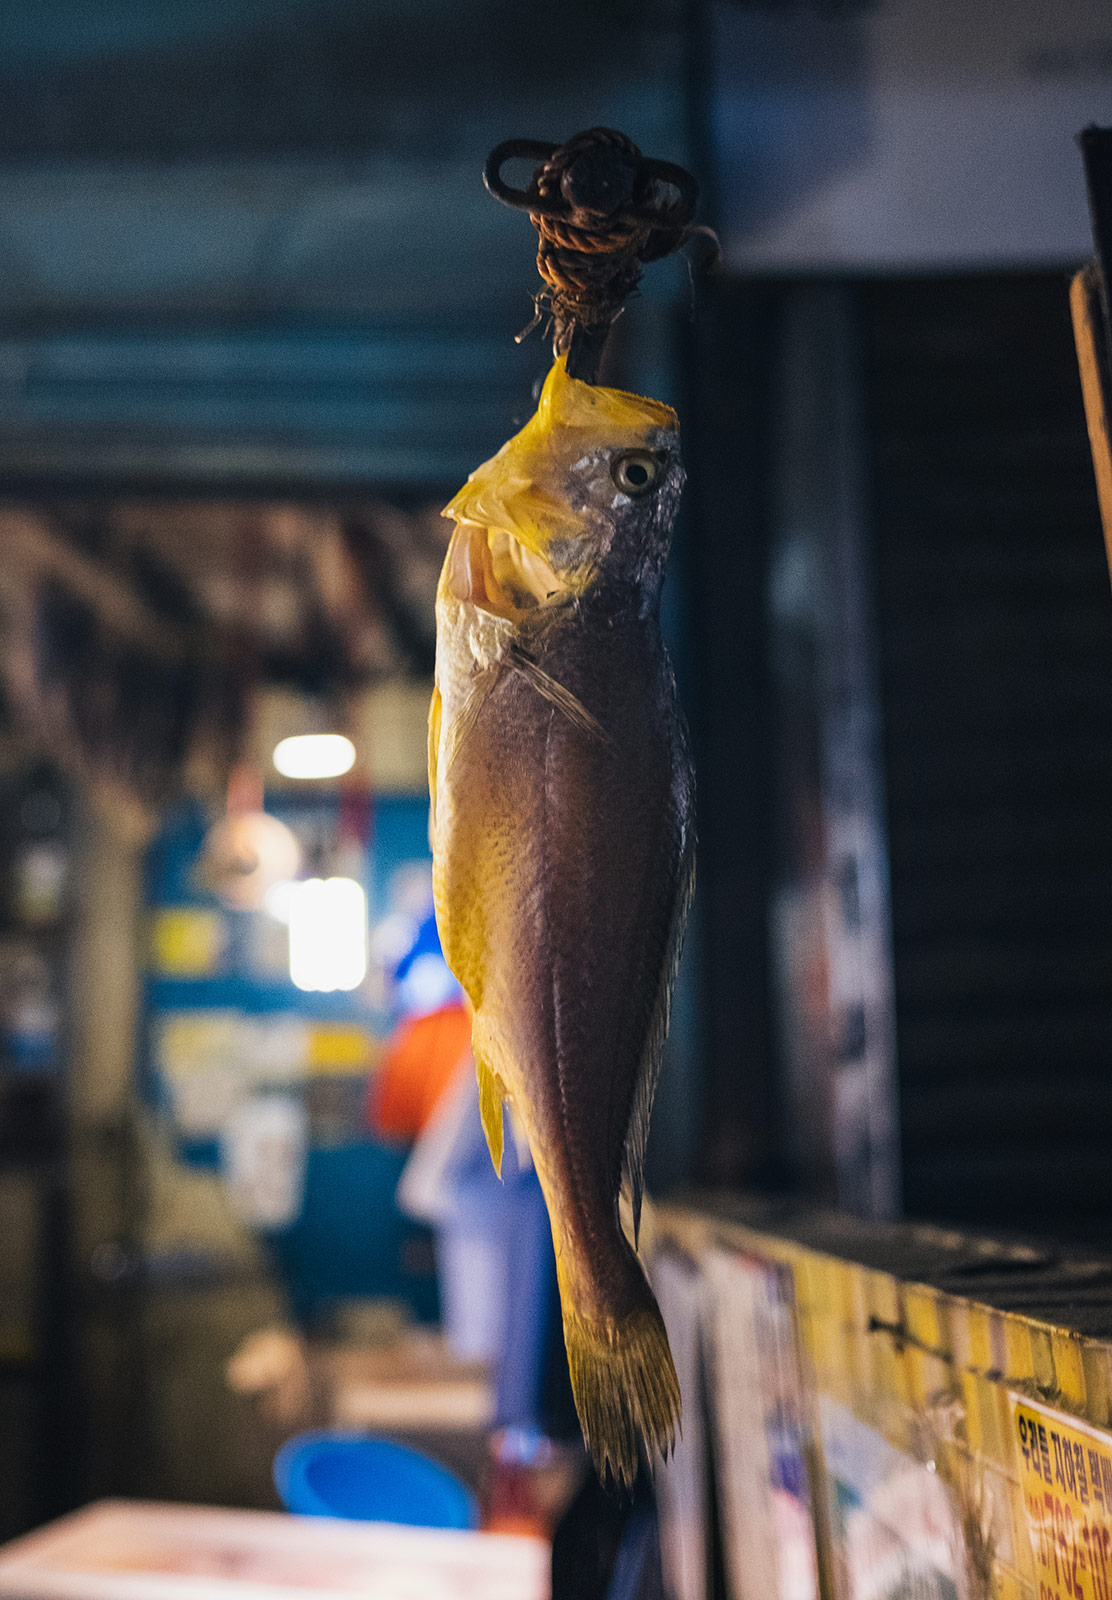 Fish hanging from stick